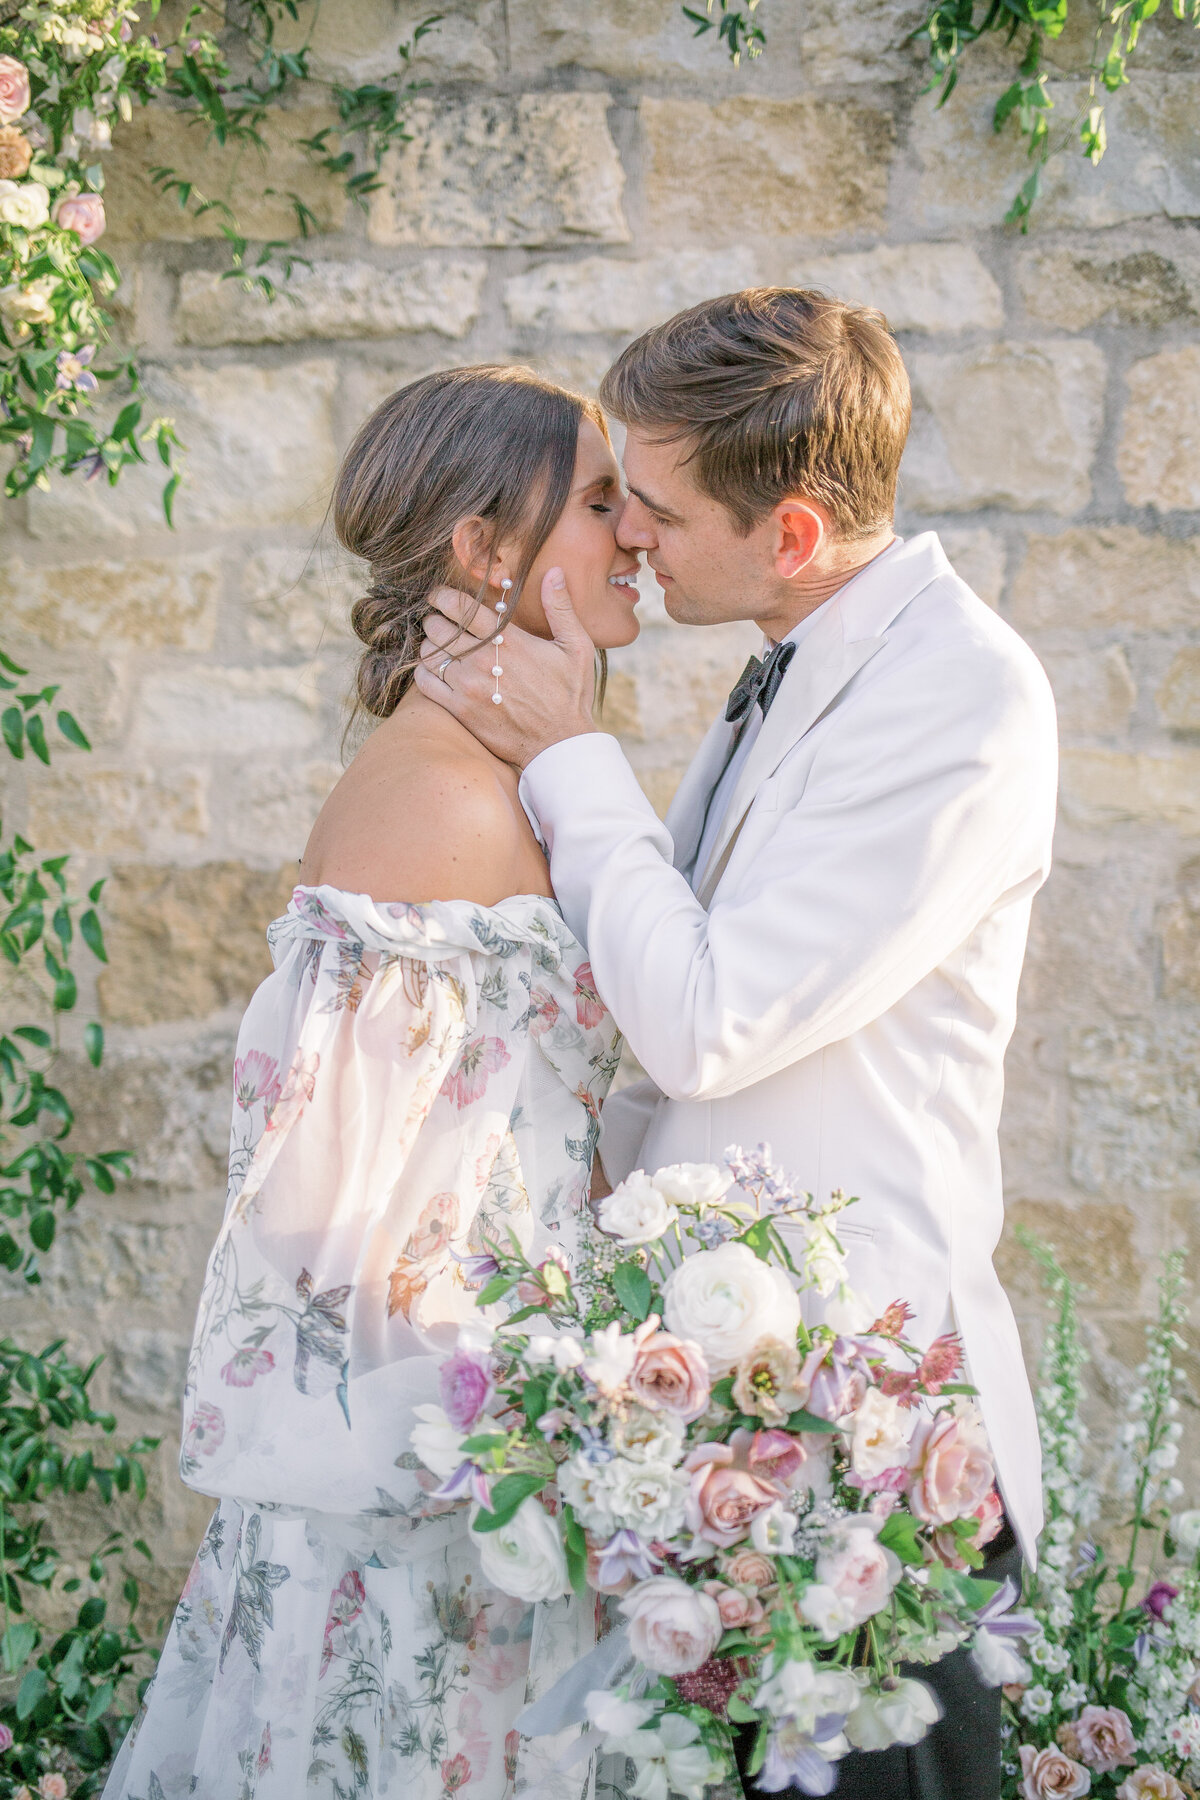 Kylie+Curtis_Sunstone_Renoda Campbell Photography-1717